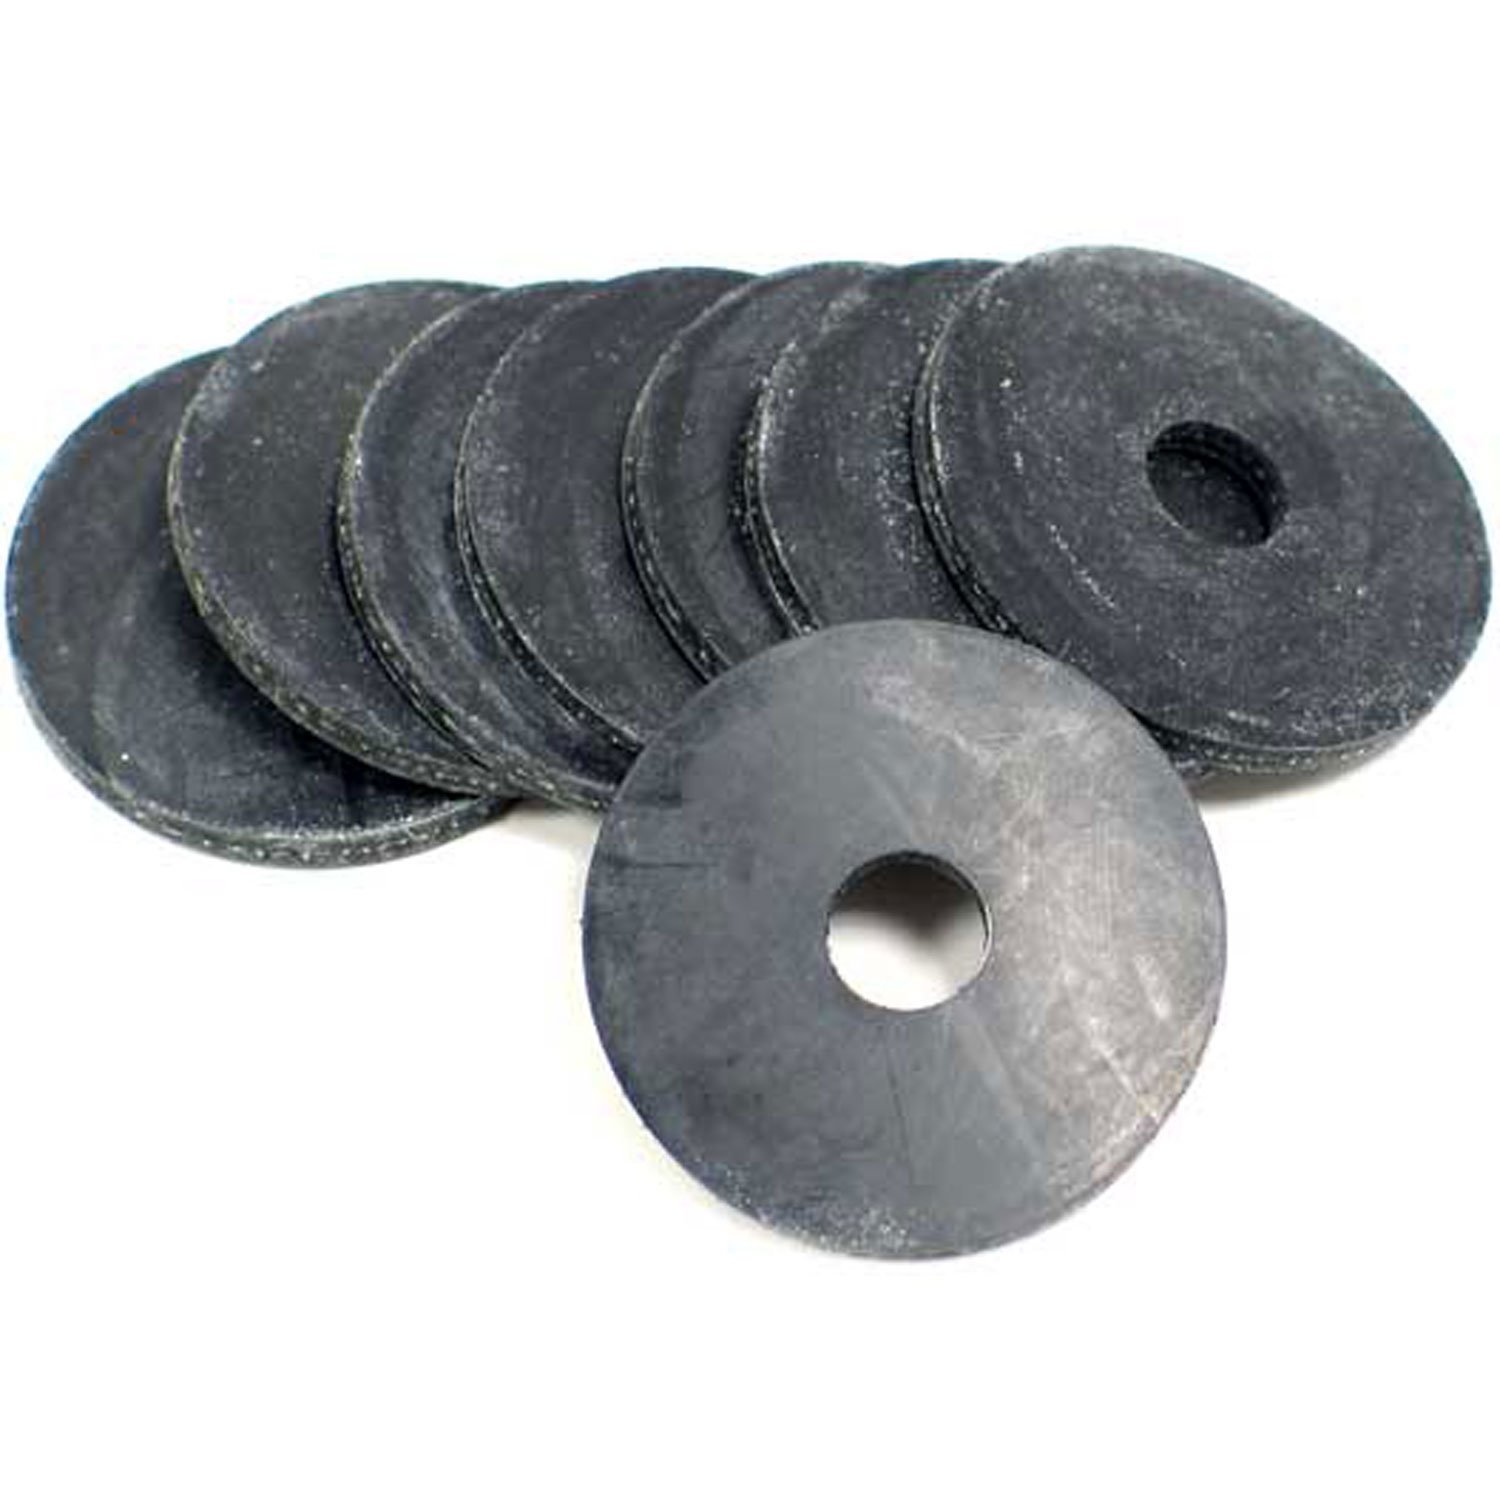 Reinforced Rubber Washers 1/8"